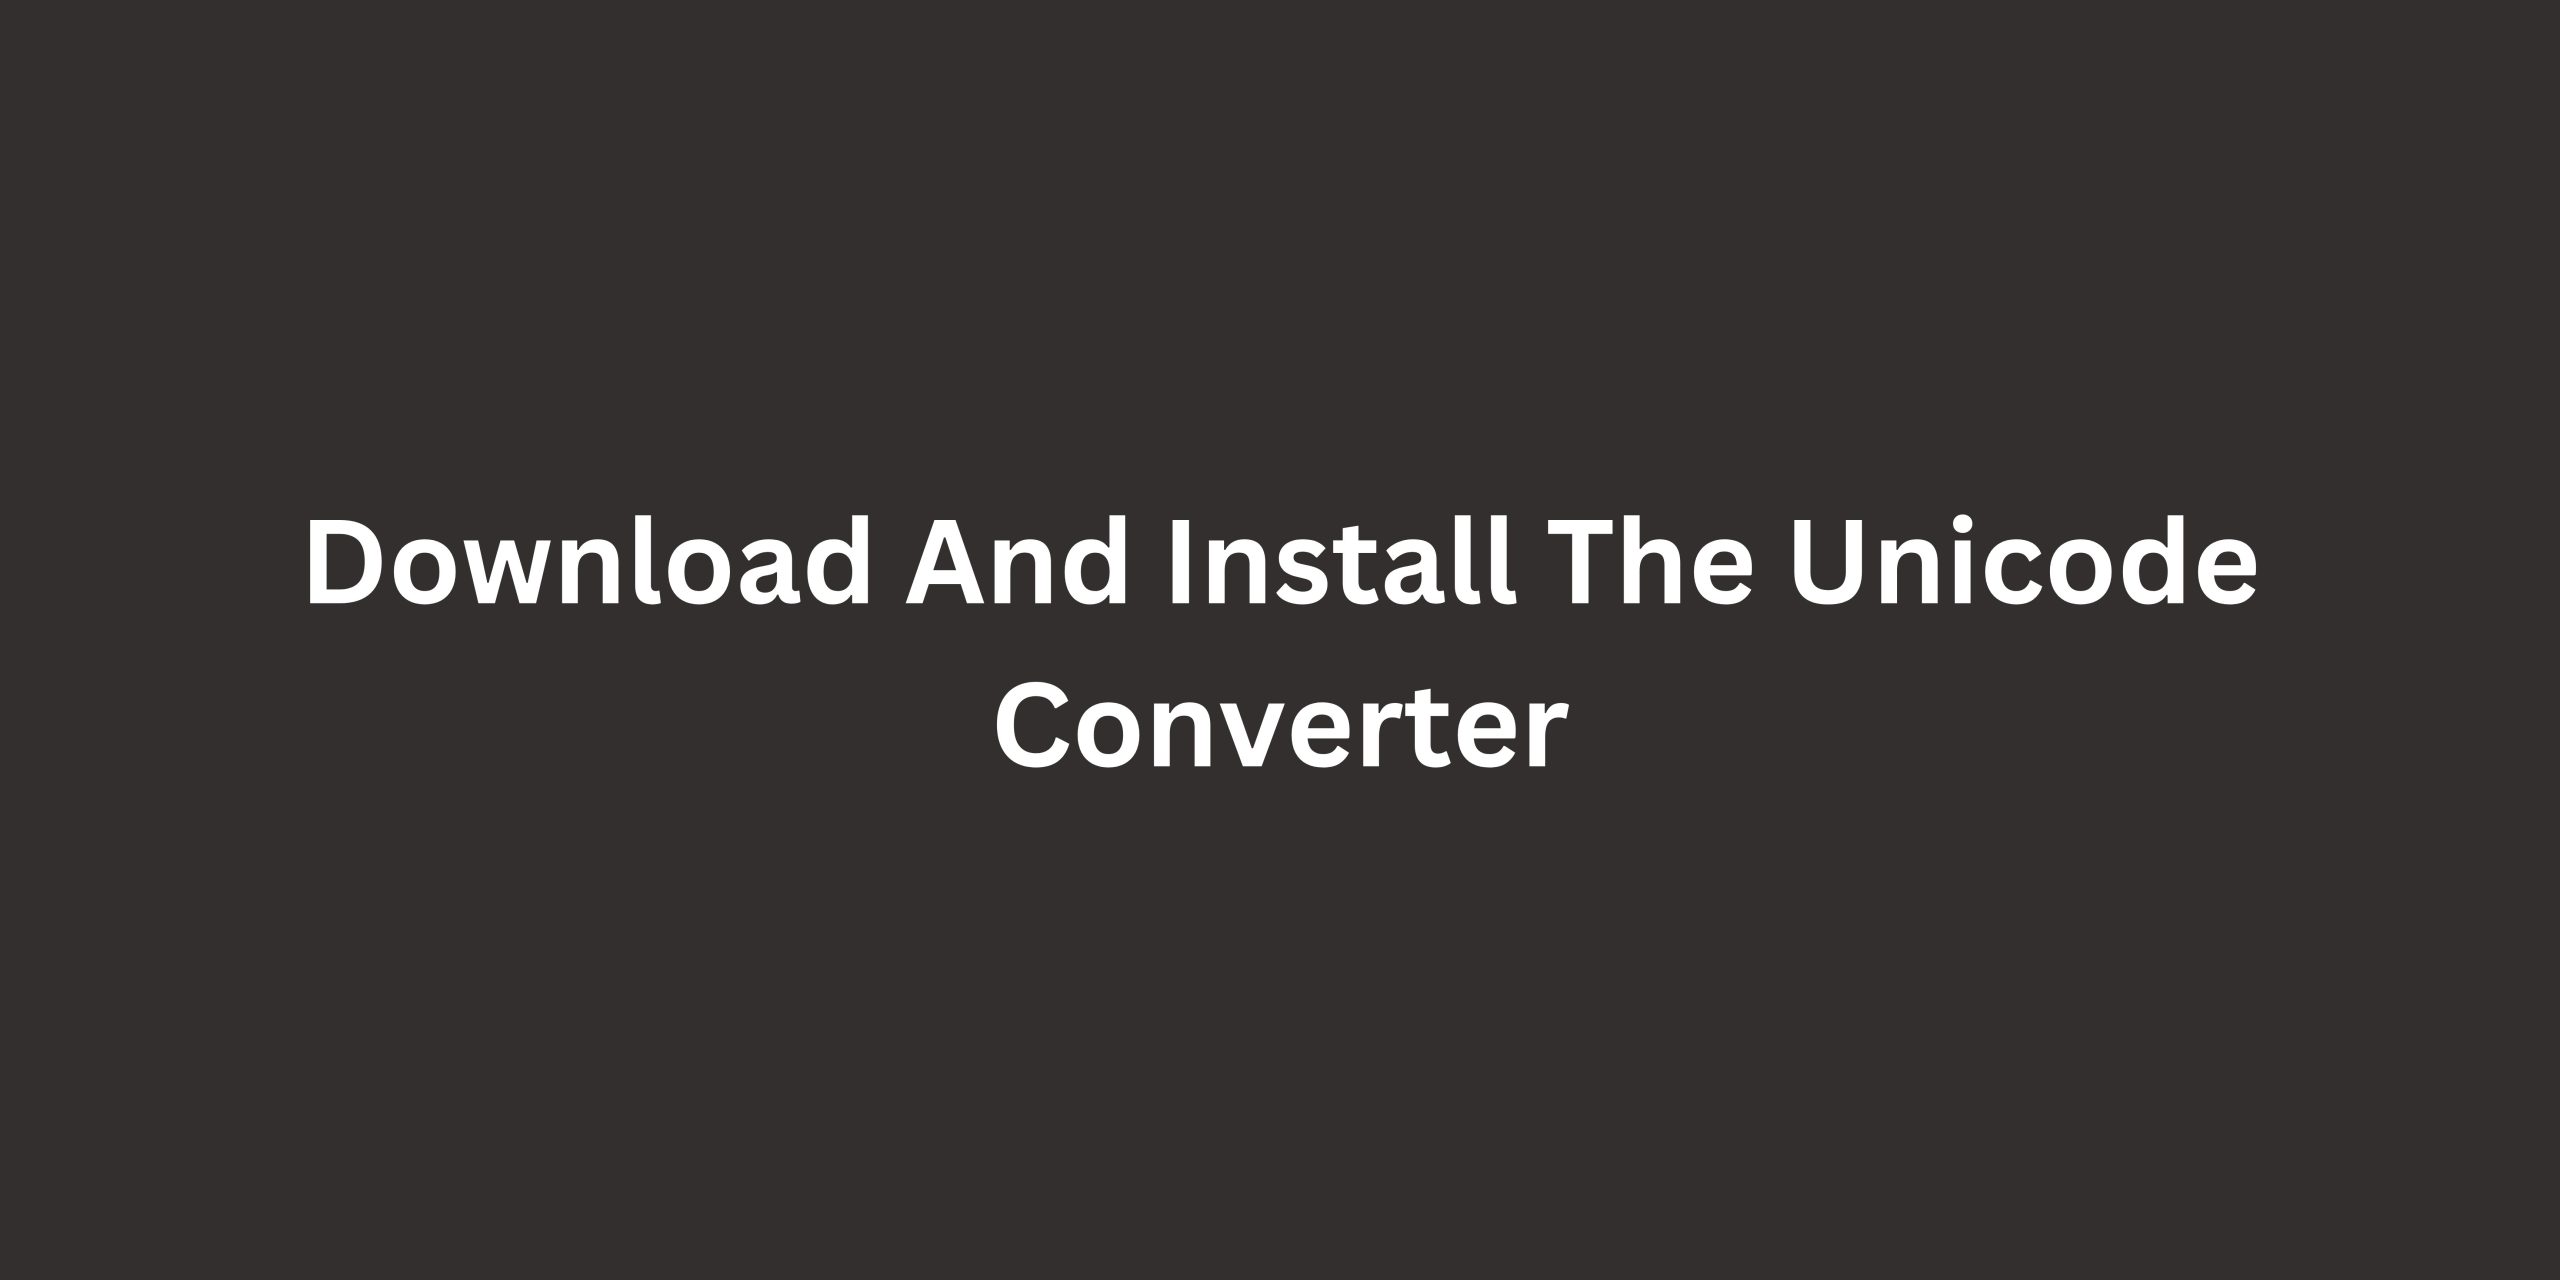 Download And Install The Unicode Converter